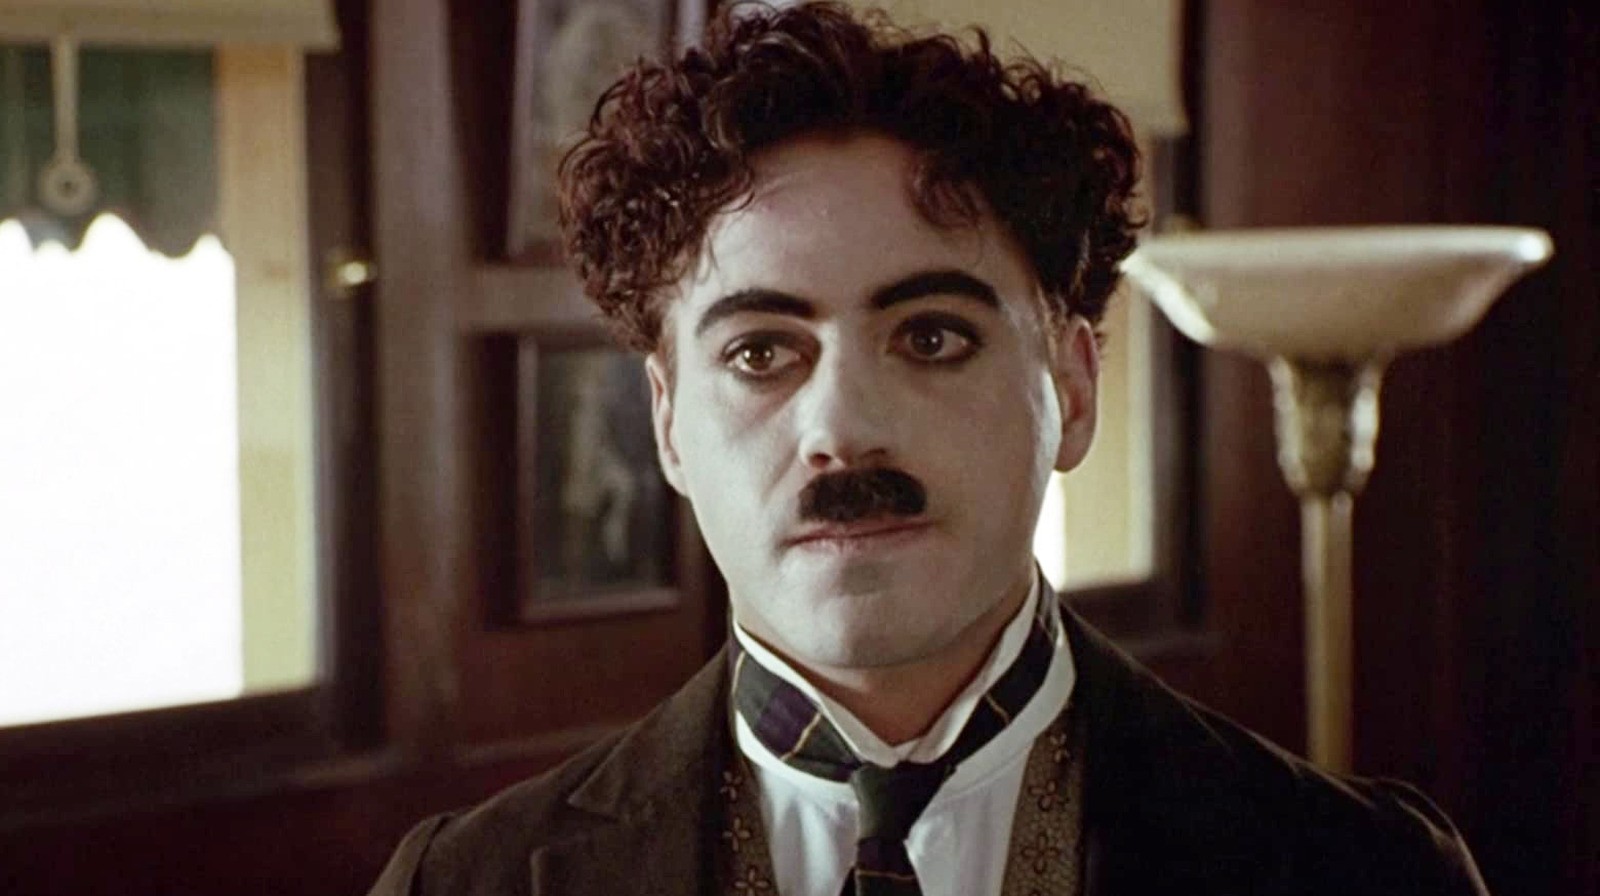 Robert Downey Jr. in and as Chaplin